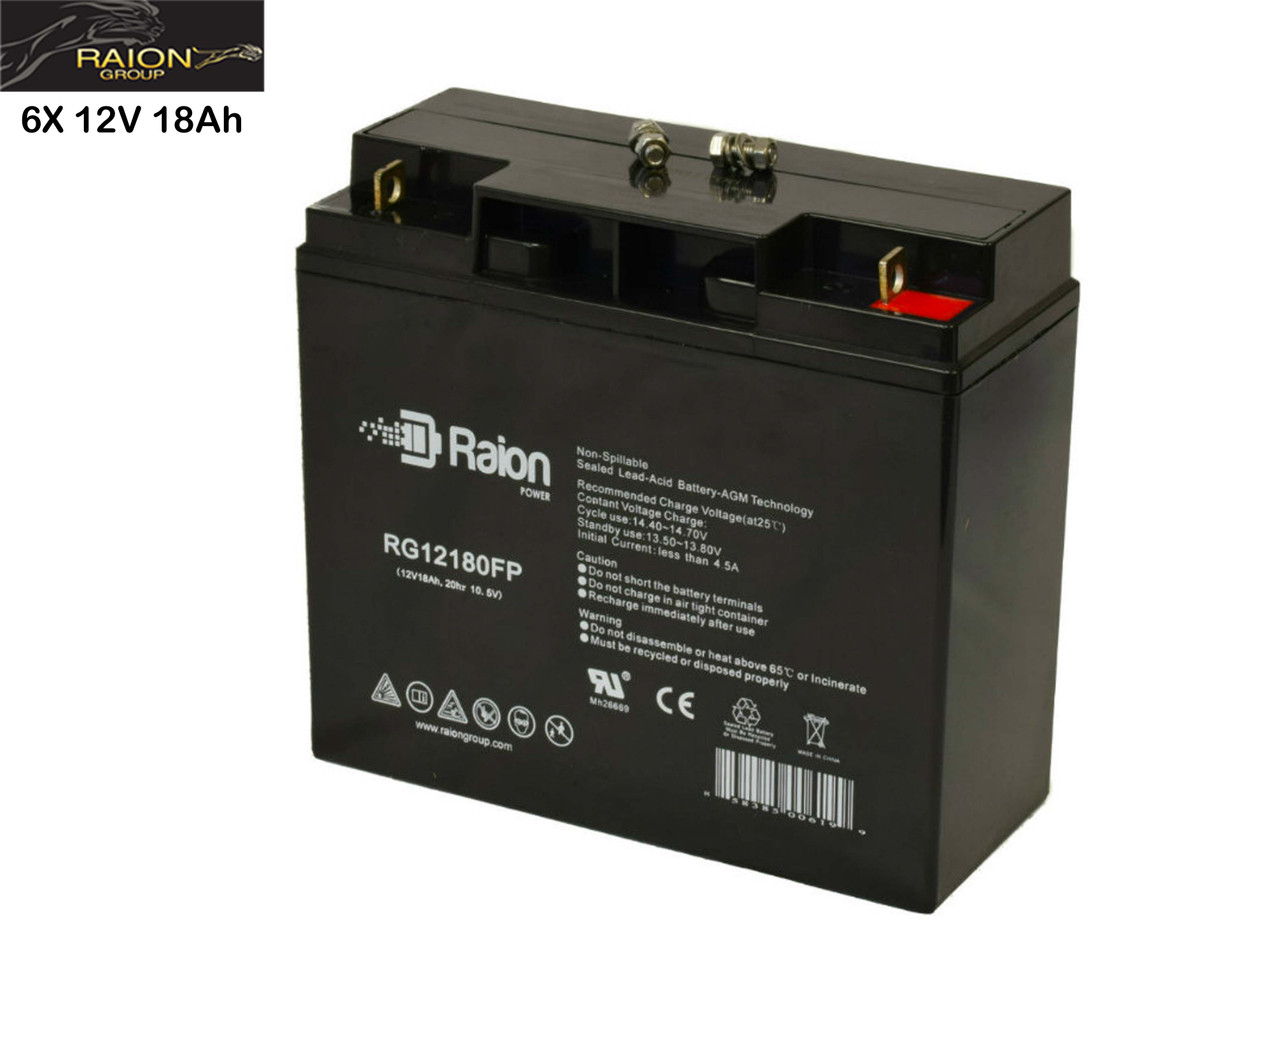 Raion Power Replacement 12V 18Ah Battery for GIO Phoenix - 6 Pack